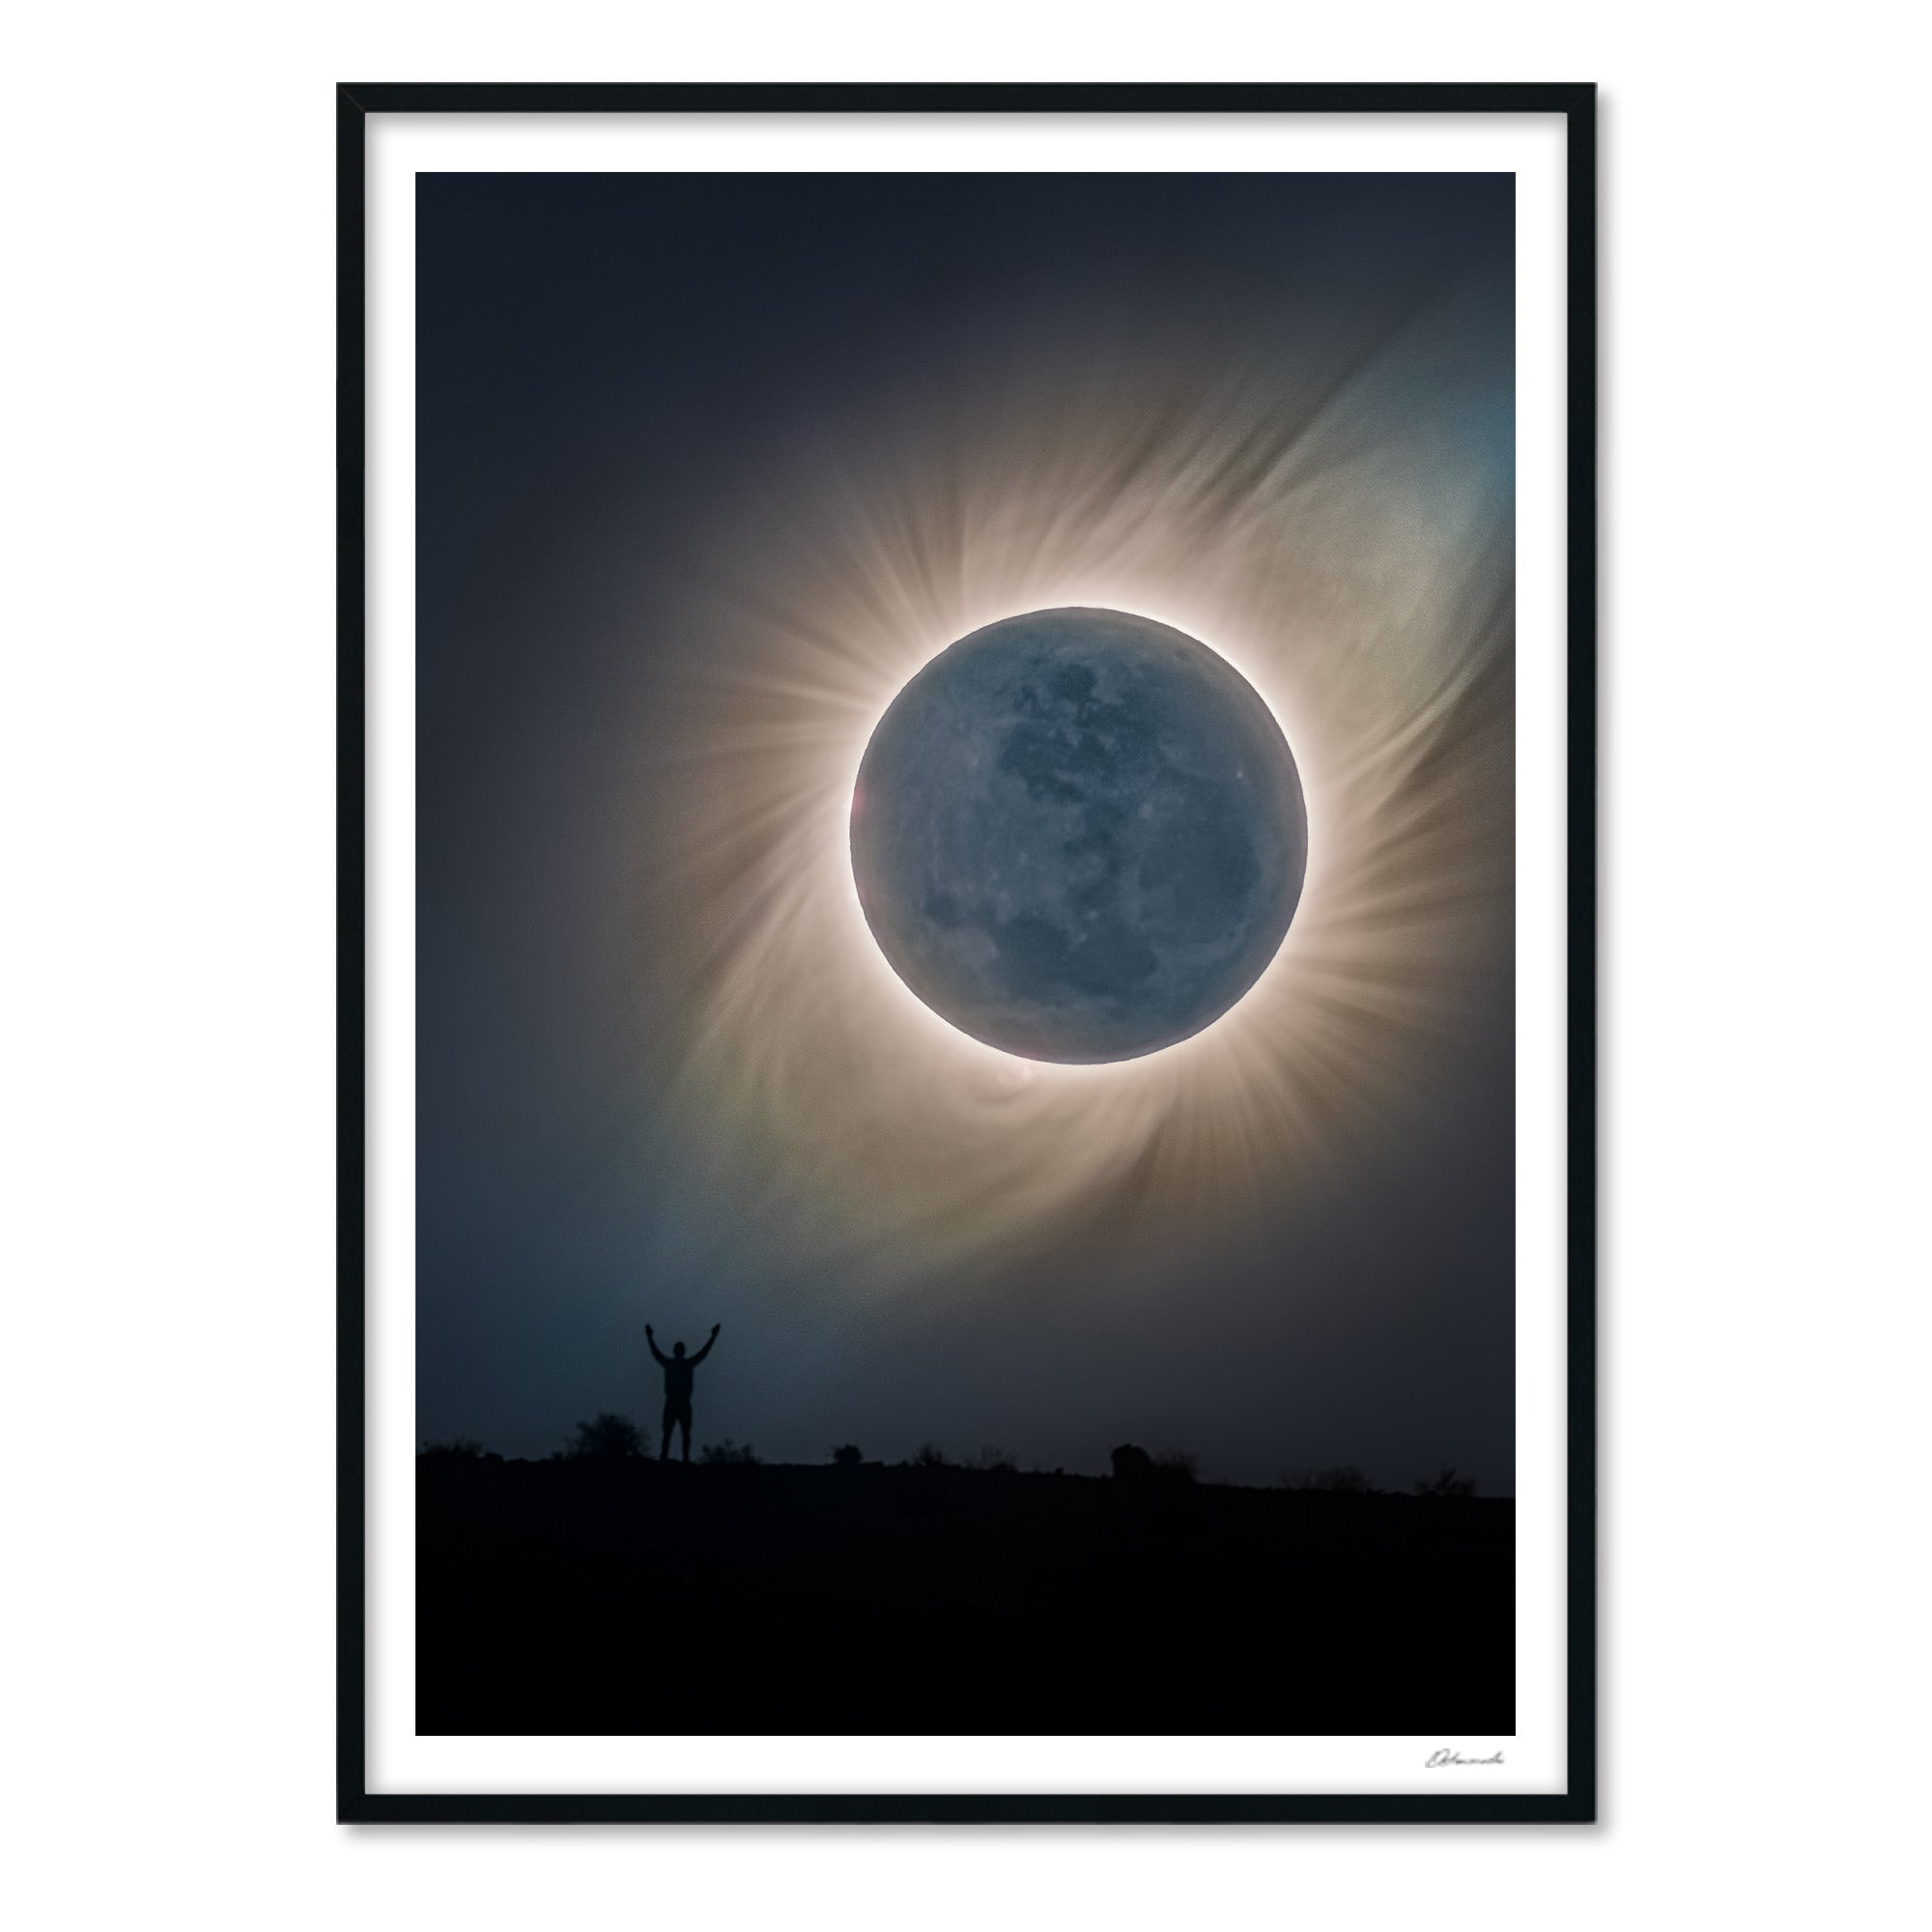 Man, Moon and Corona of the Sun - Total Solar Eclipse, 2nd July of 2019, Chile